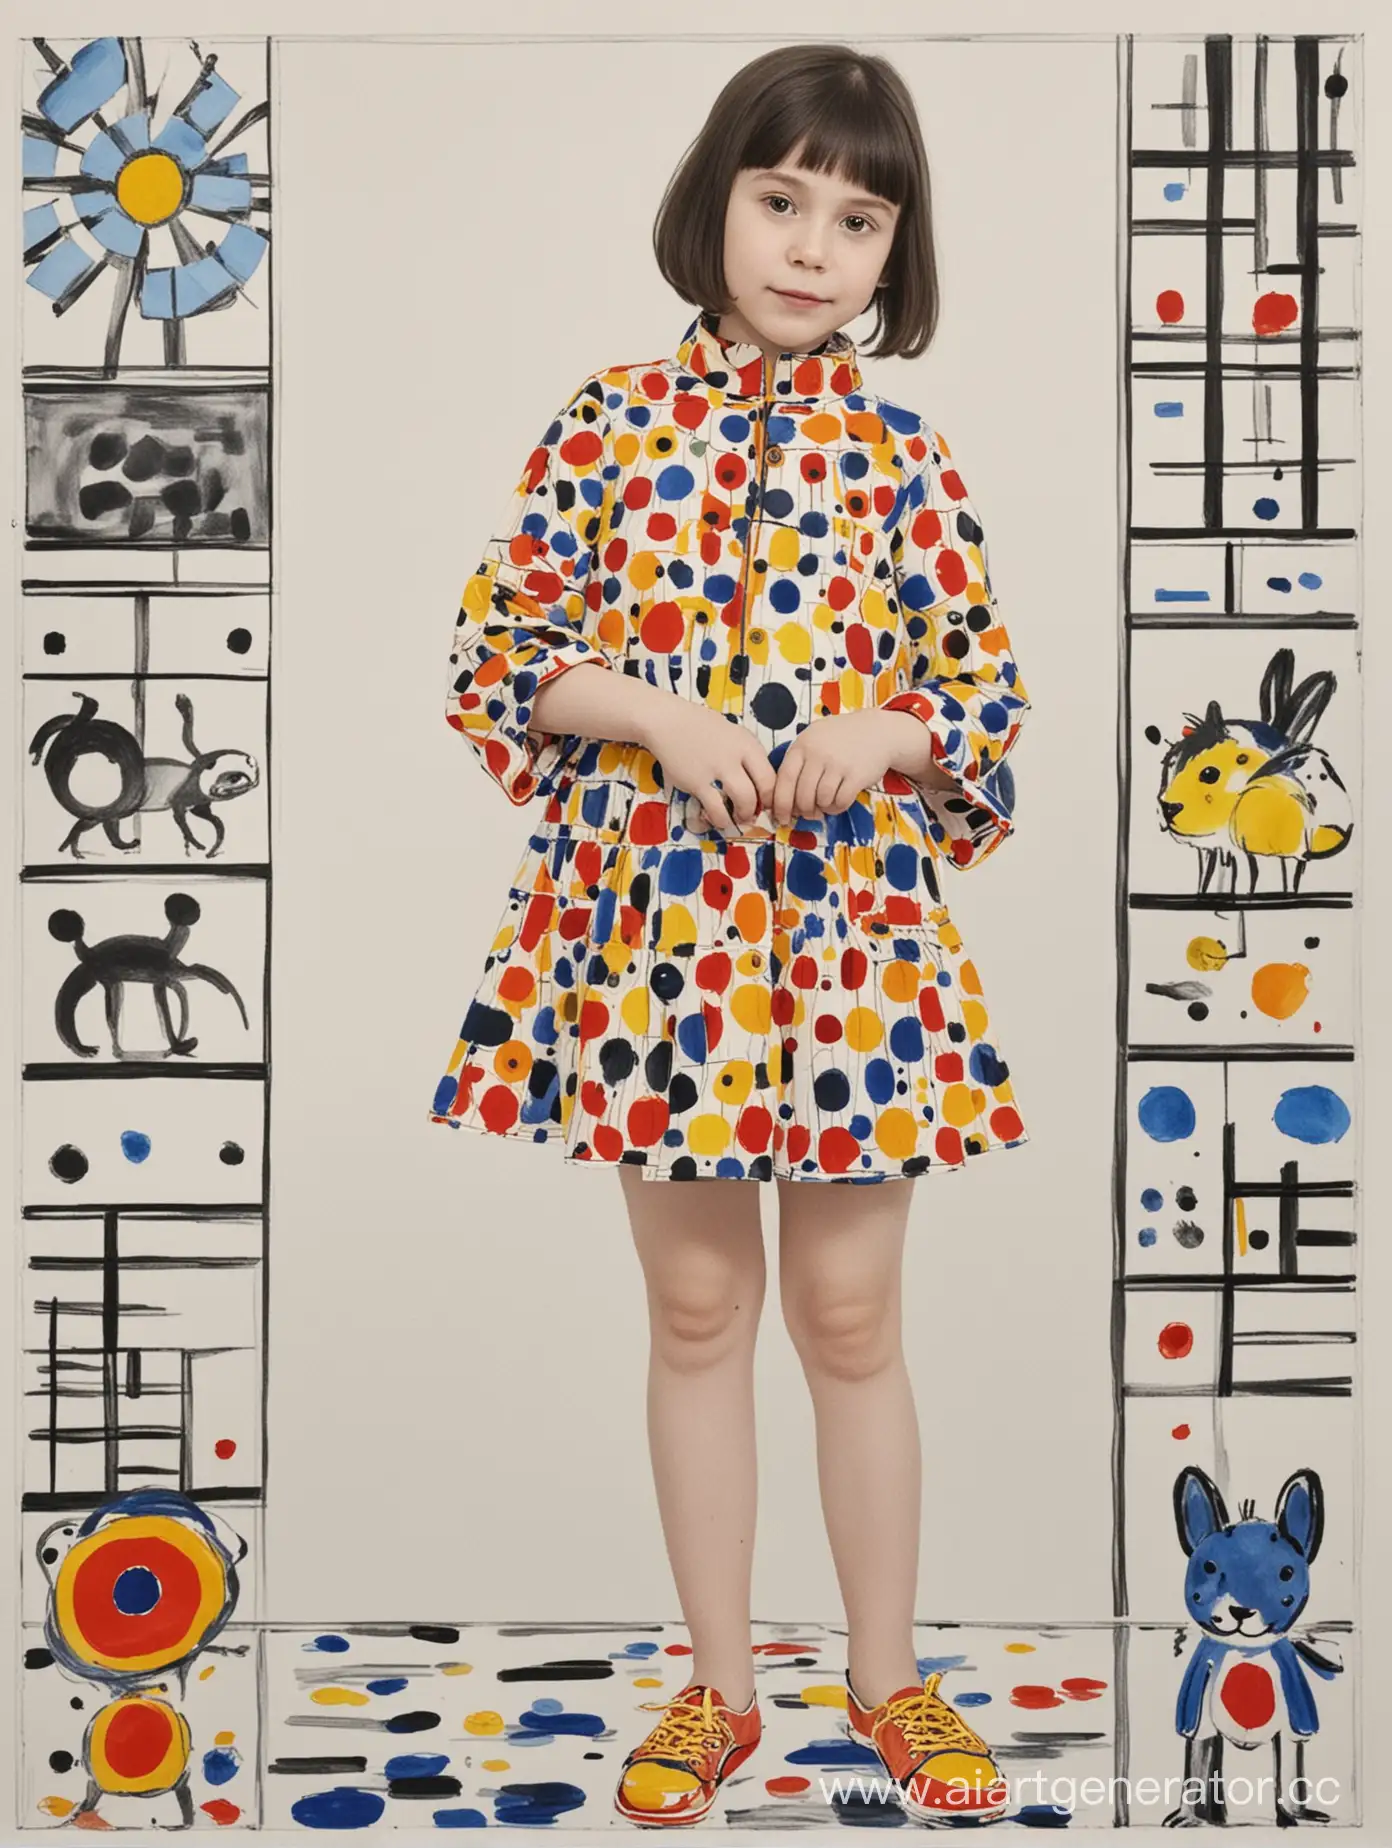 create a painting based on the work of artists Piet Mondrian and Yayoi Kusama. Add an animal drawn by the child in the center of the picture